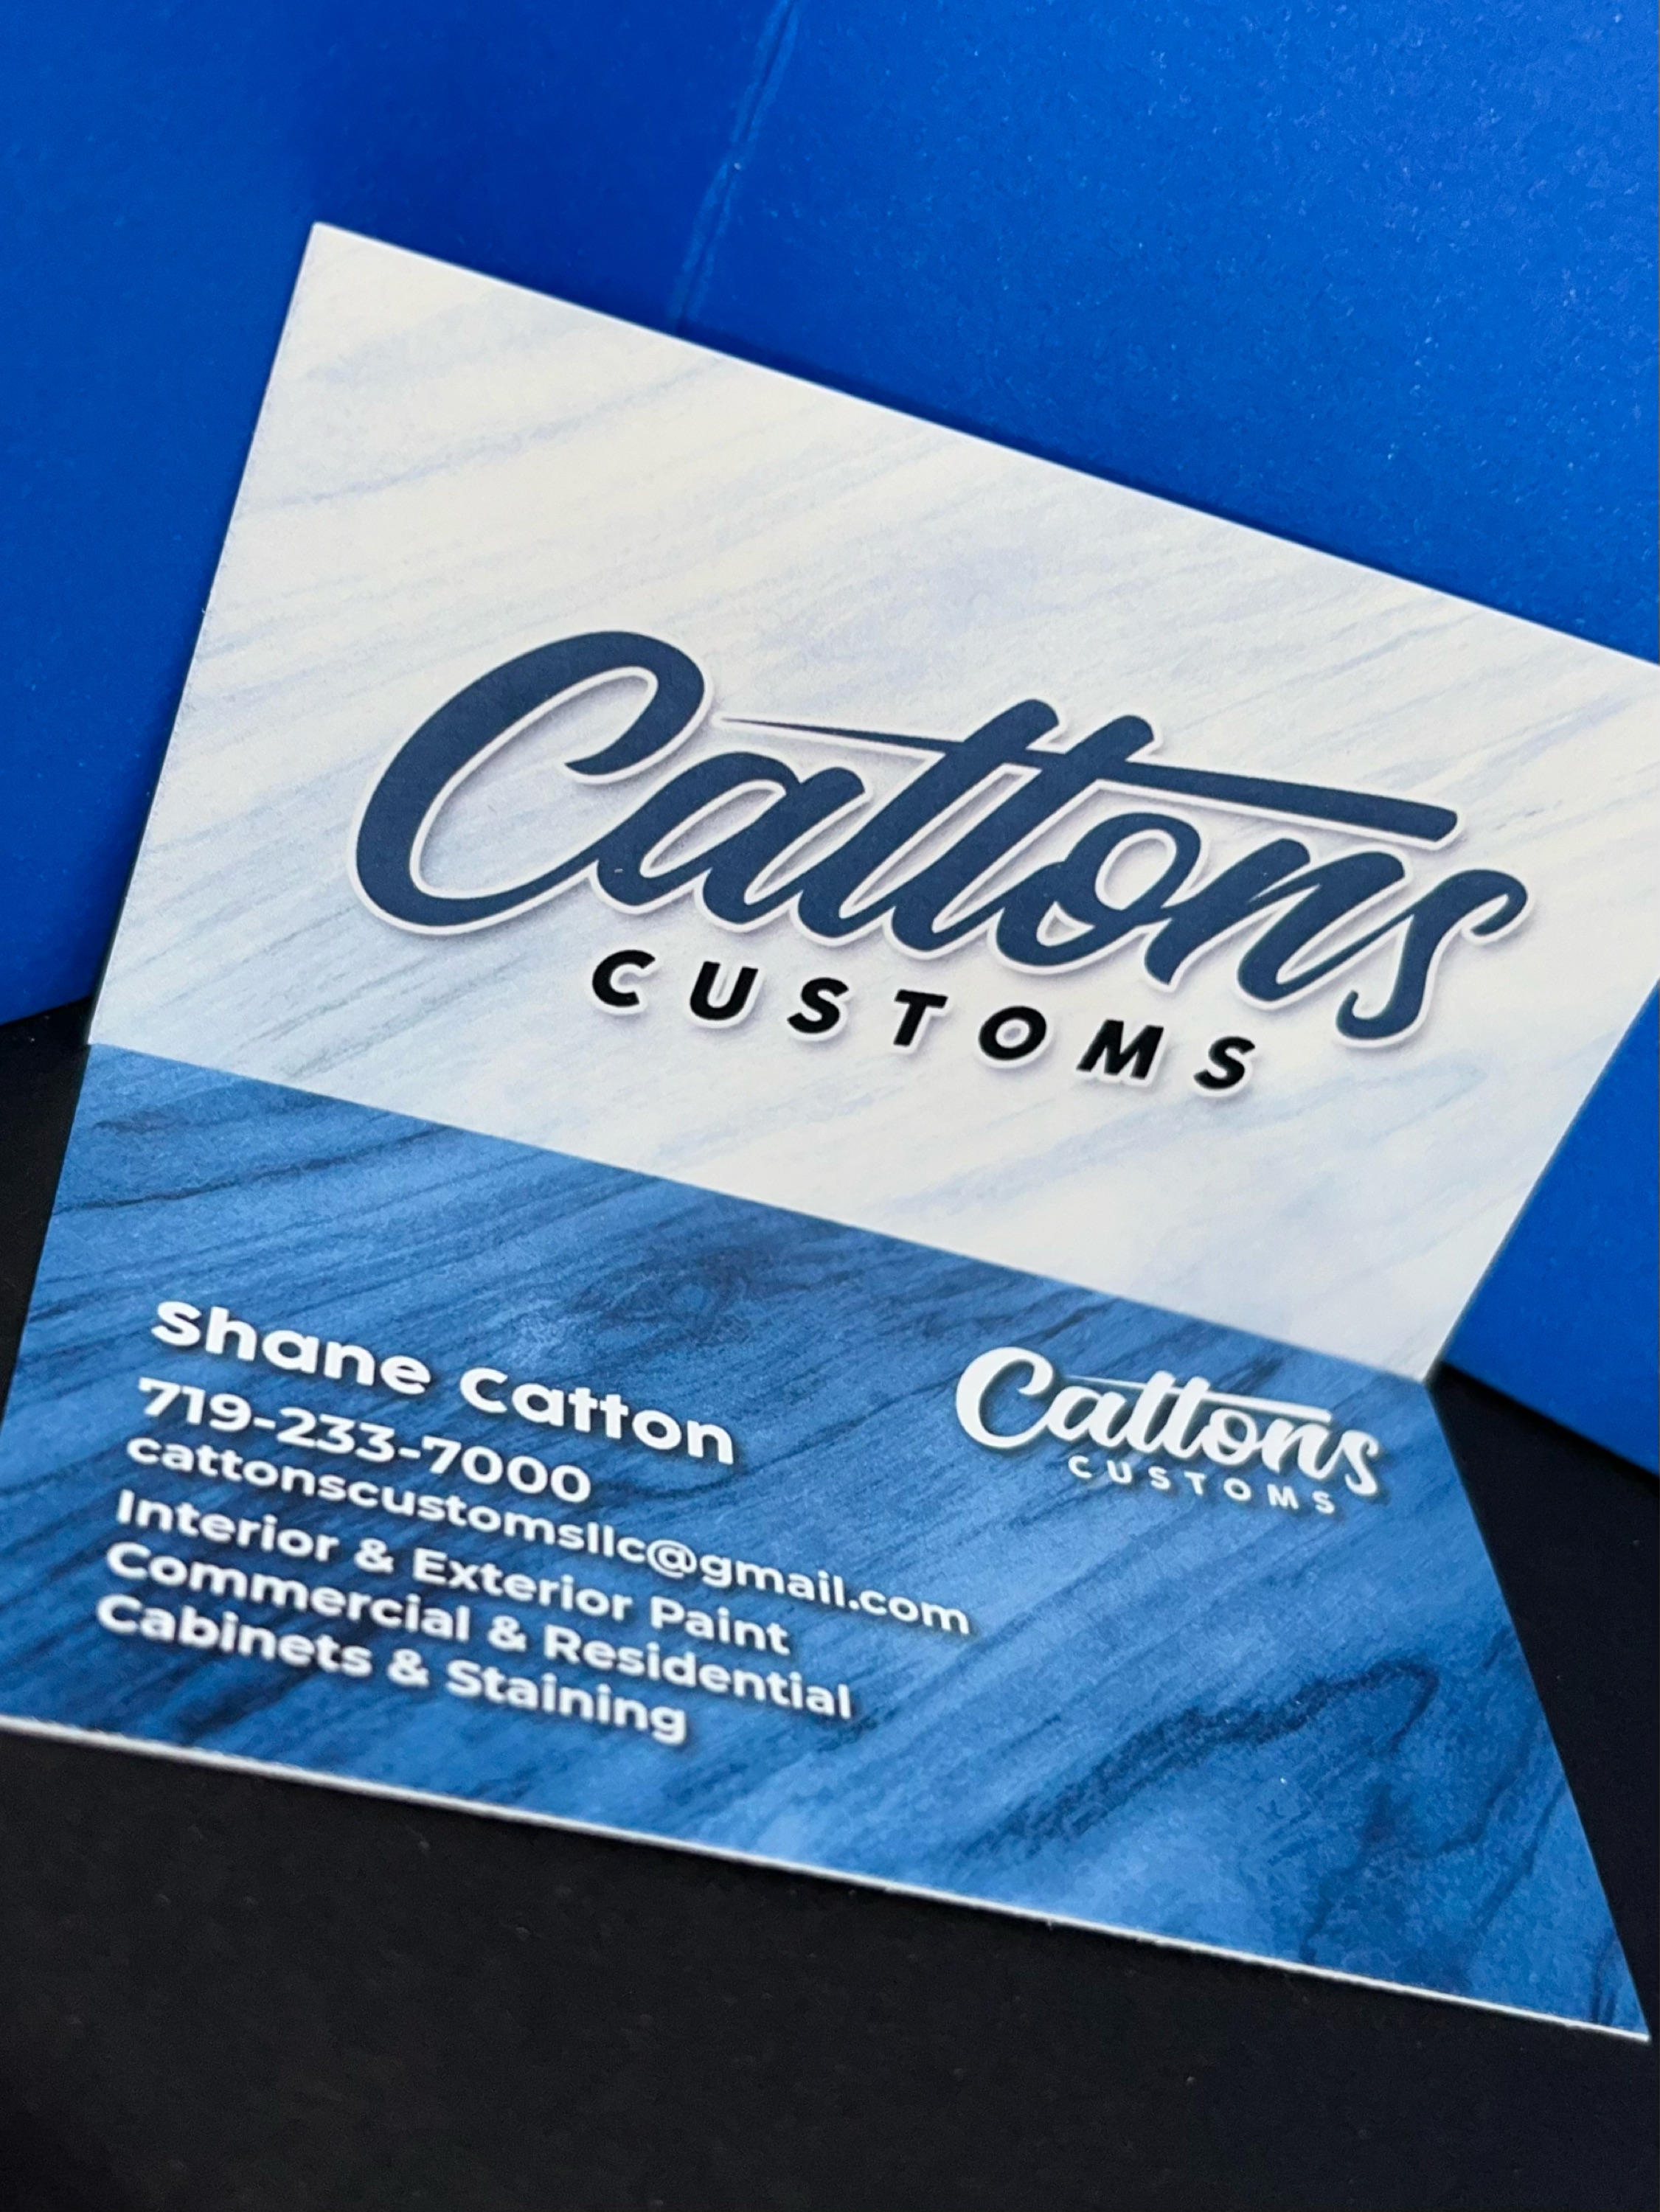 Cattons Customs Painting Logo